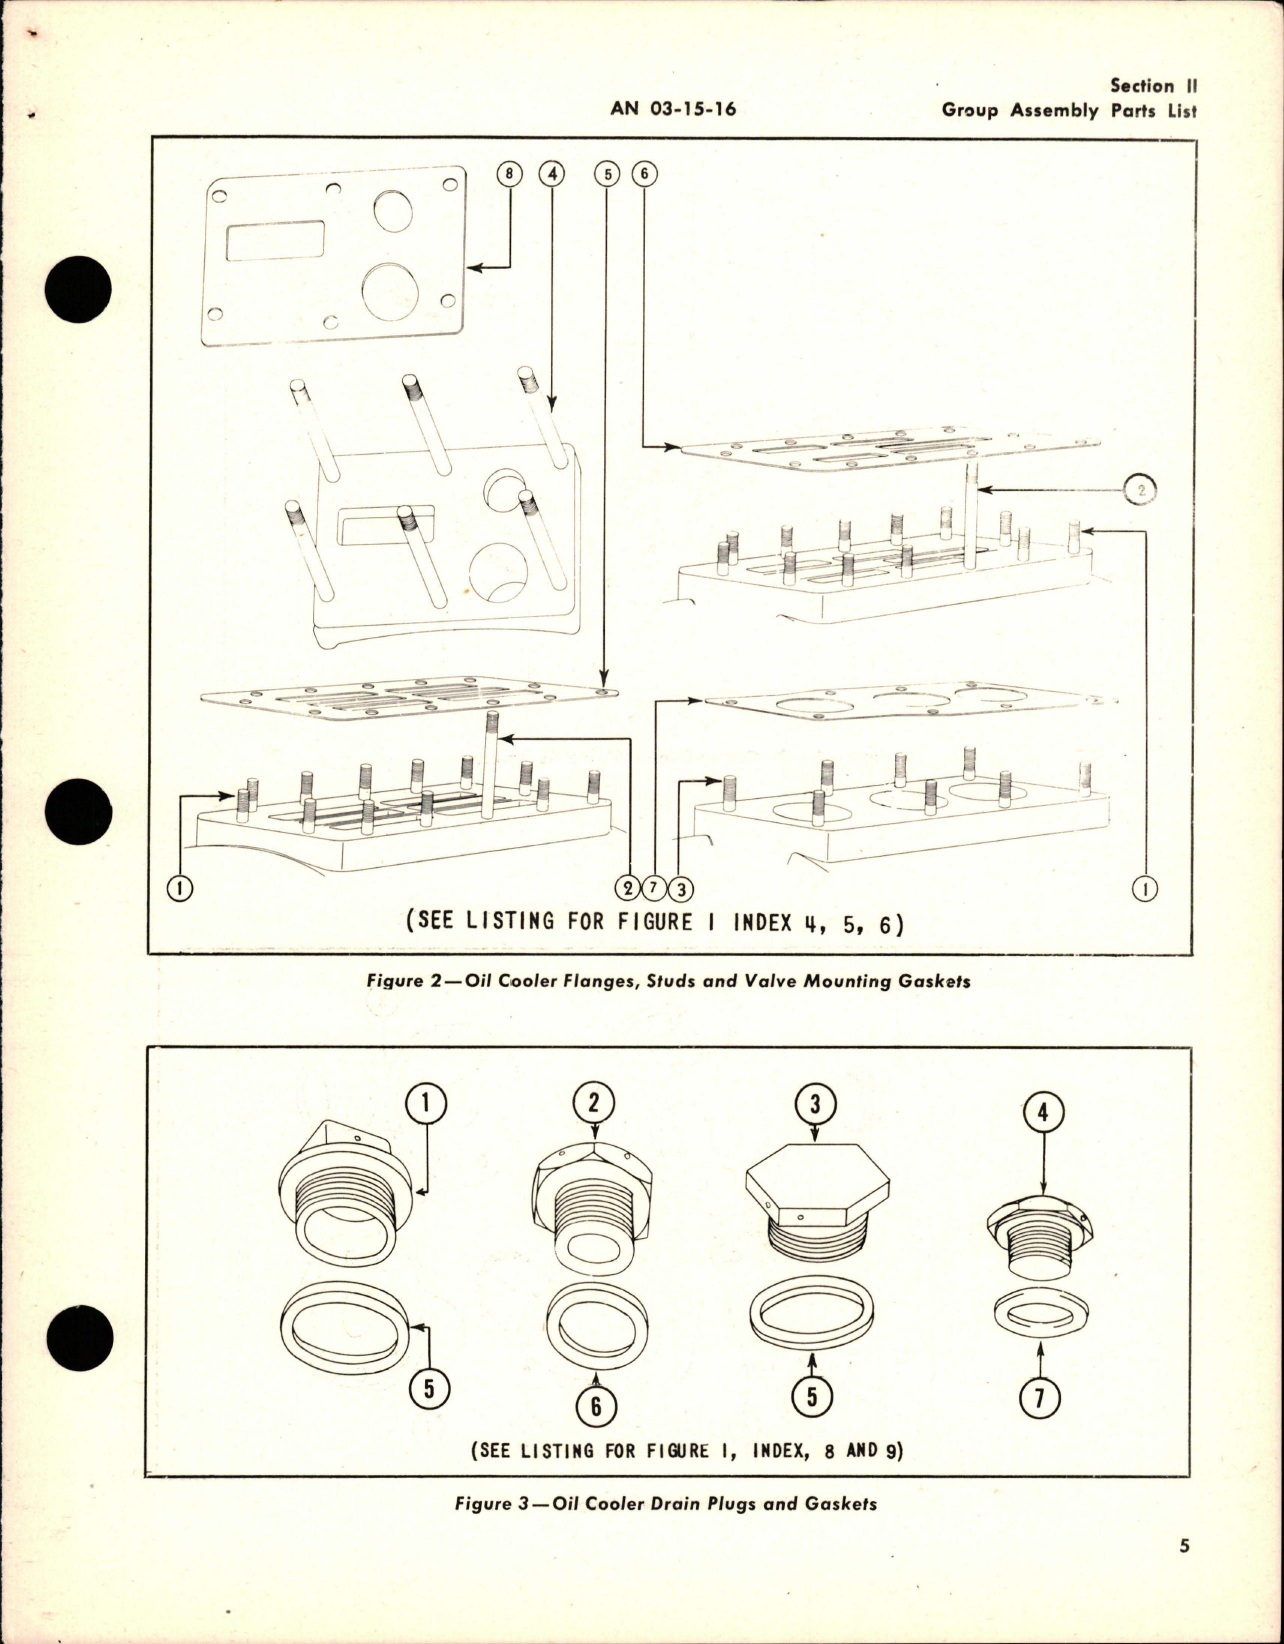 Sample page 9 from AirCorps Library document: Parts Catalog for Oil Coolers & Control Valves 